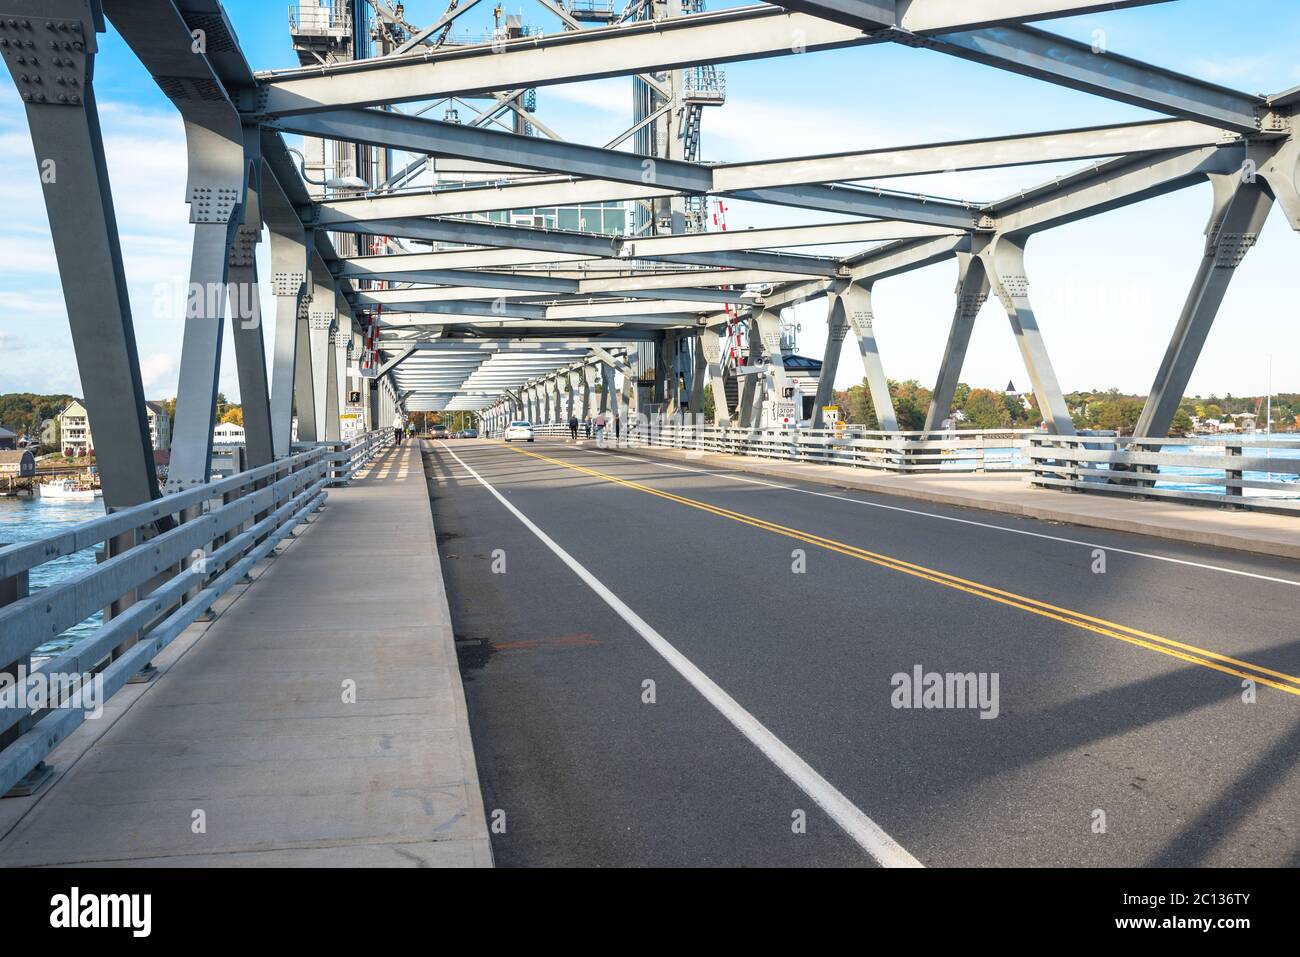 VErtical lift bridge with walkways on both sides of the road on a clear autumn day Stock Photo